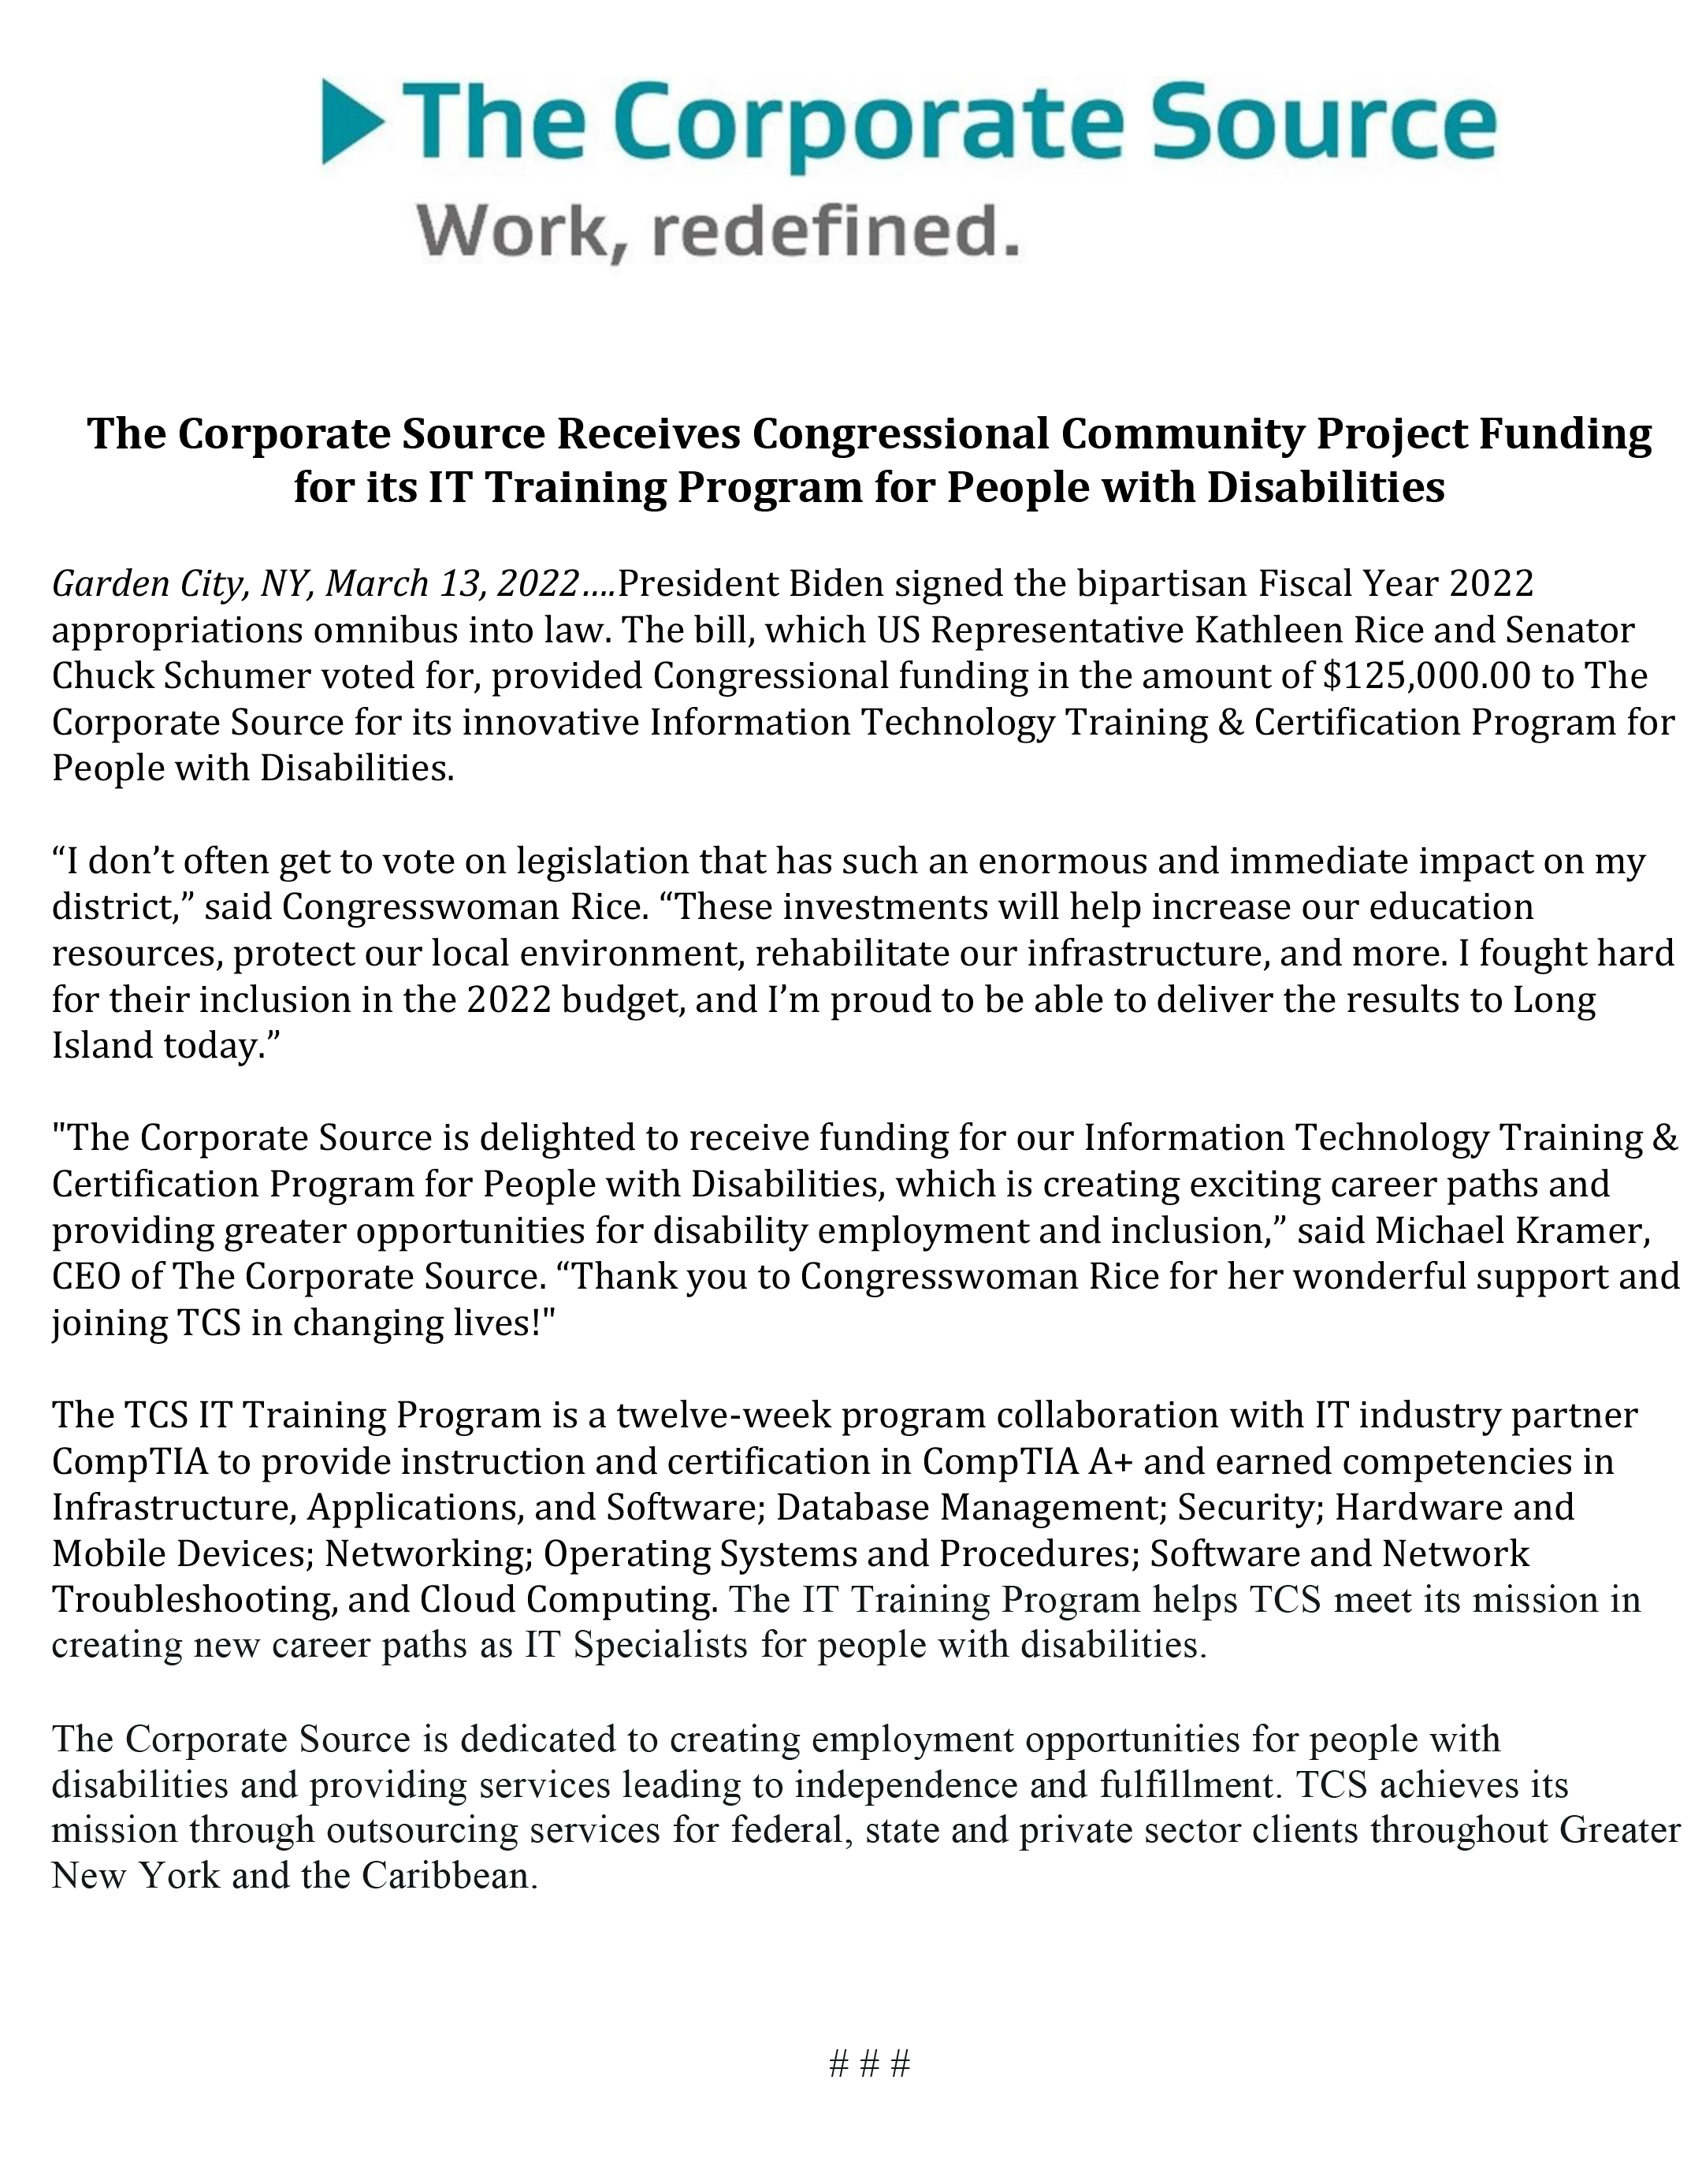 The Corporate Source Receives Congressional Community Project Funding for its IT Training Program for People with Disabilities